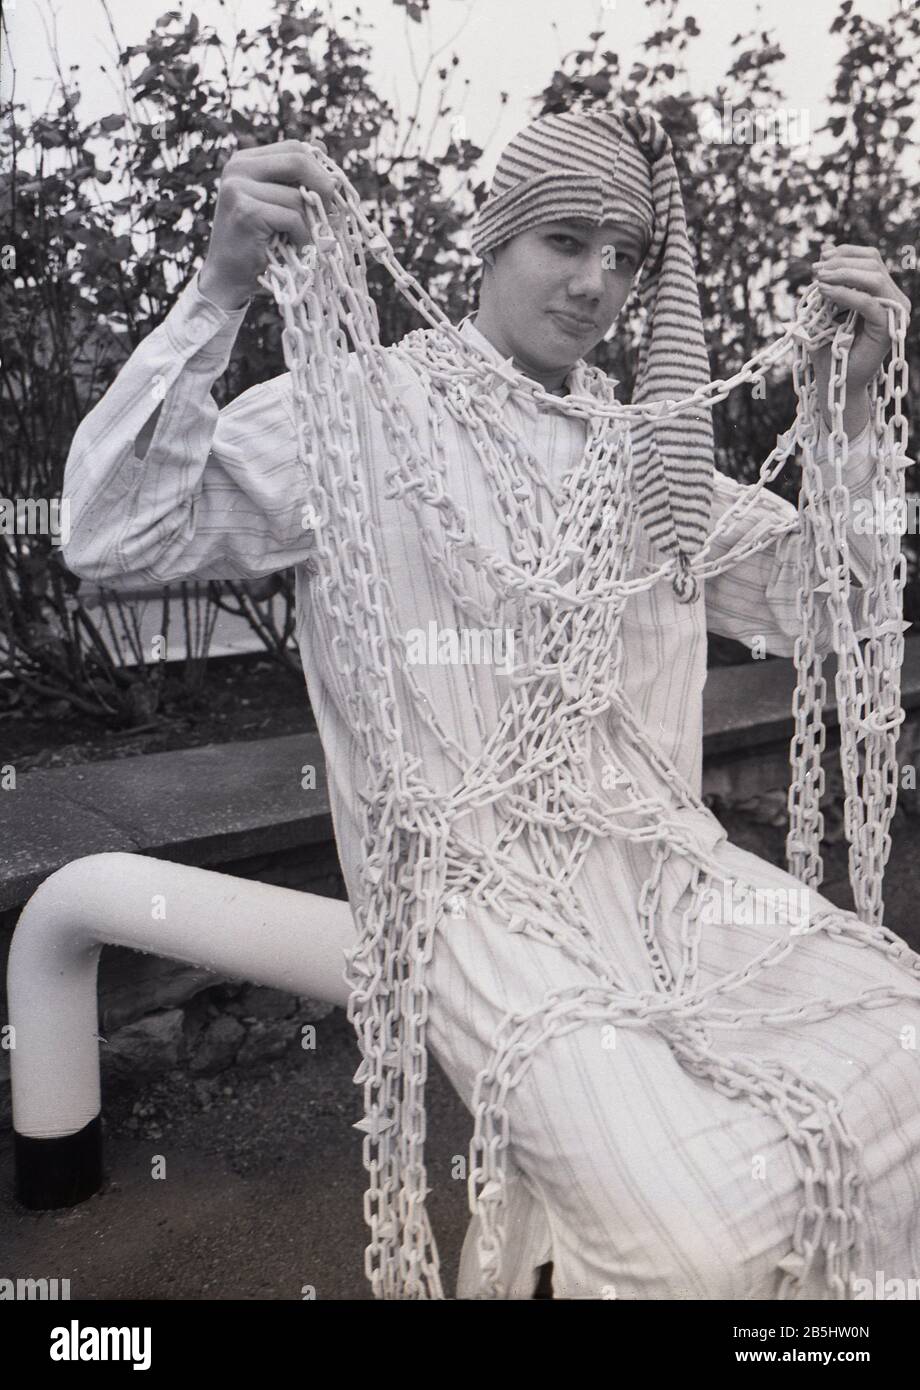 1980s, historical, young man dressed up as a character from the  novel 'Silas Marner', the ghost or supernatural at a carol singing event, England, UK, wearing an ankle length cotton nightshirt, with wee winky hat and cloth chain. Stock Photo